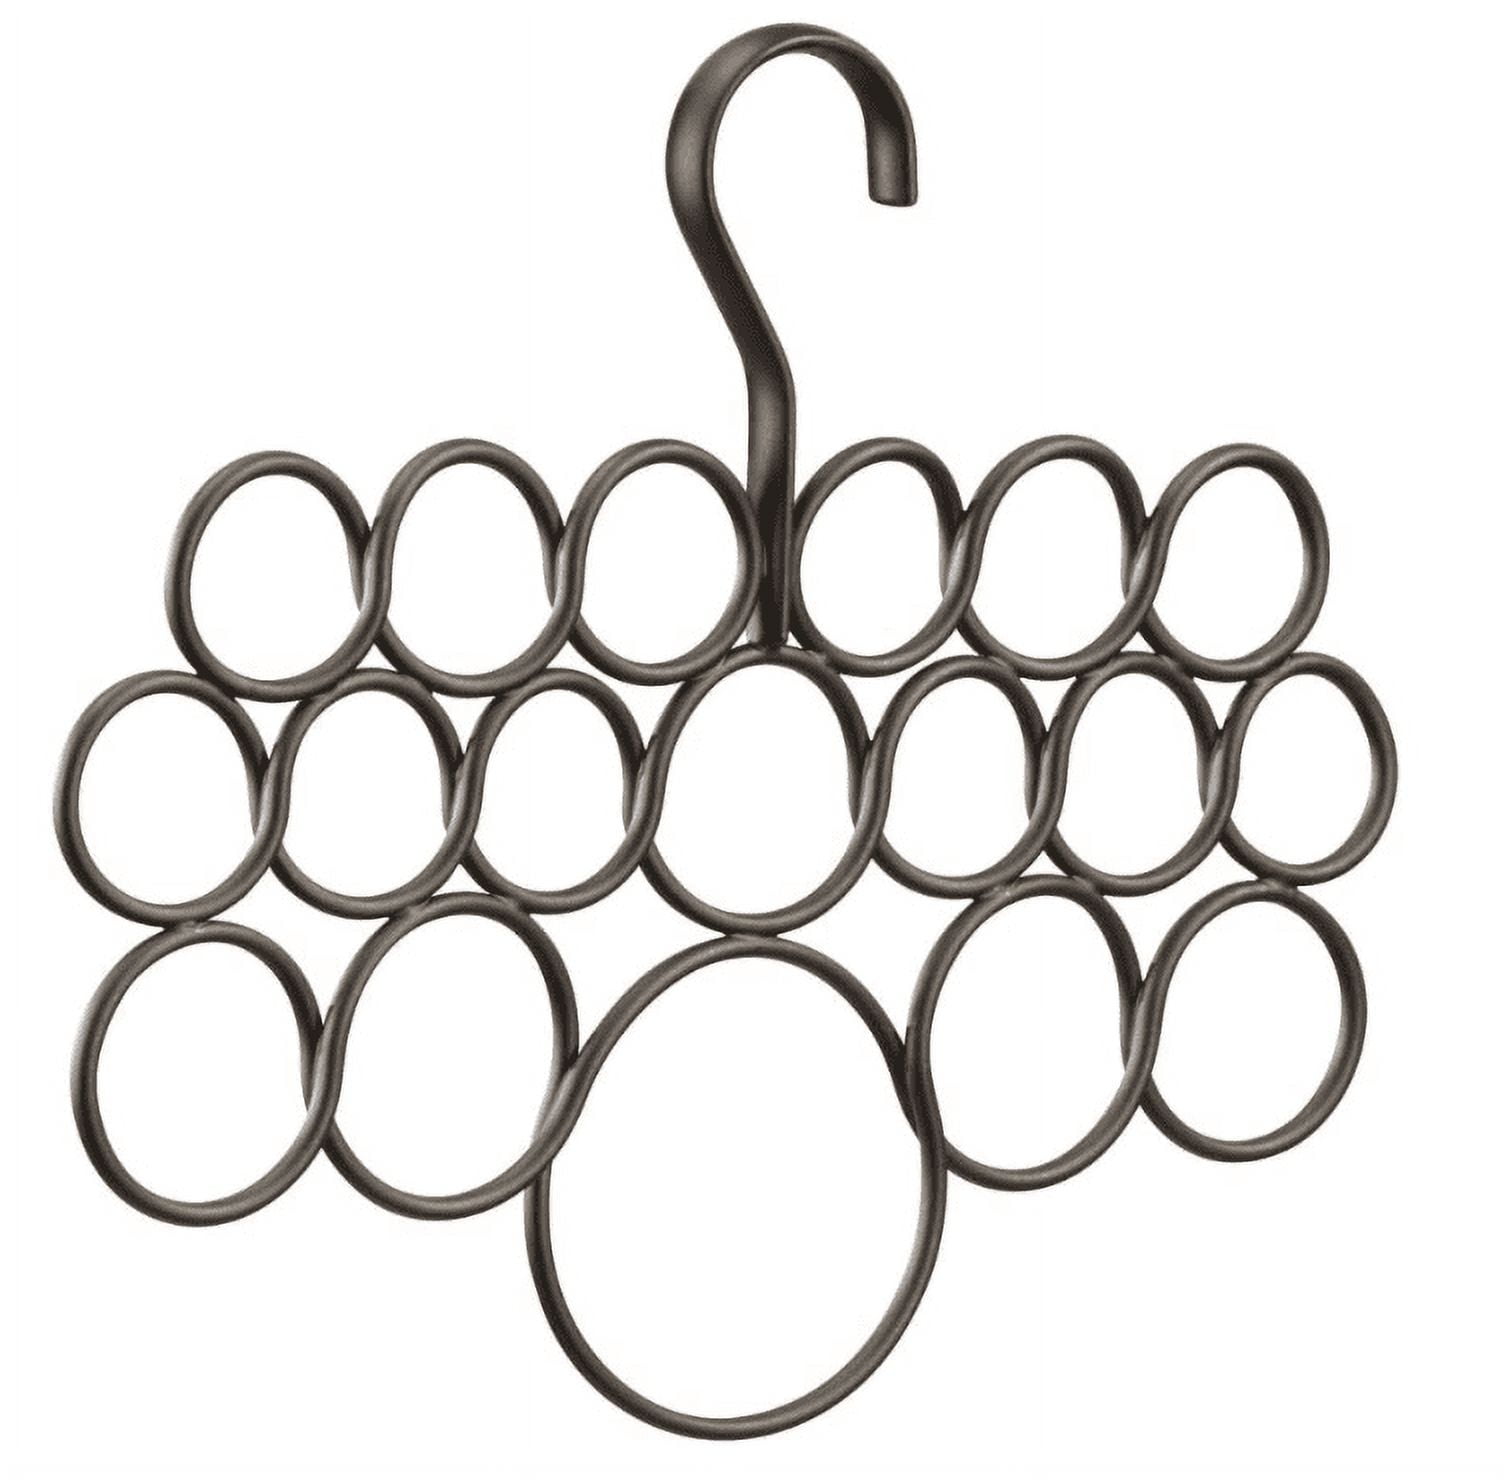 CSL Foodservice & Hospitality Hangers & Accessory Organizers